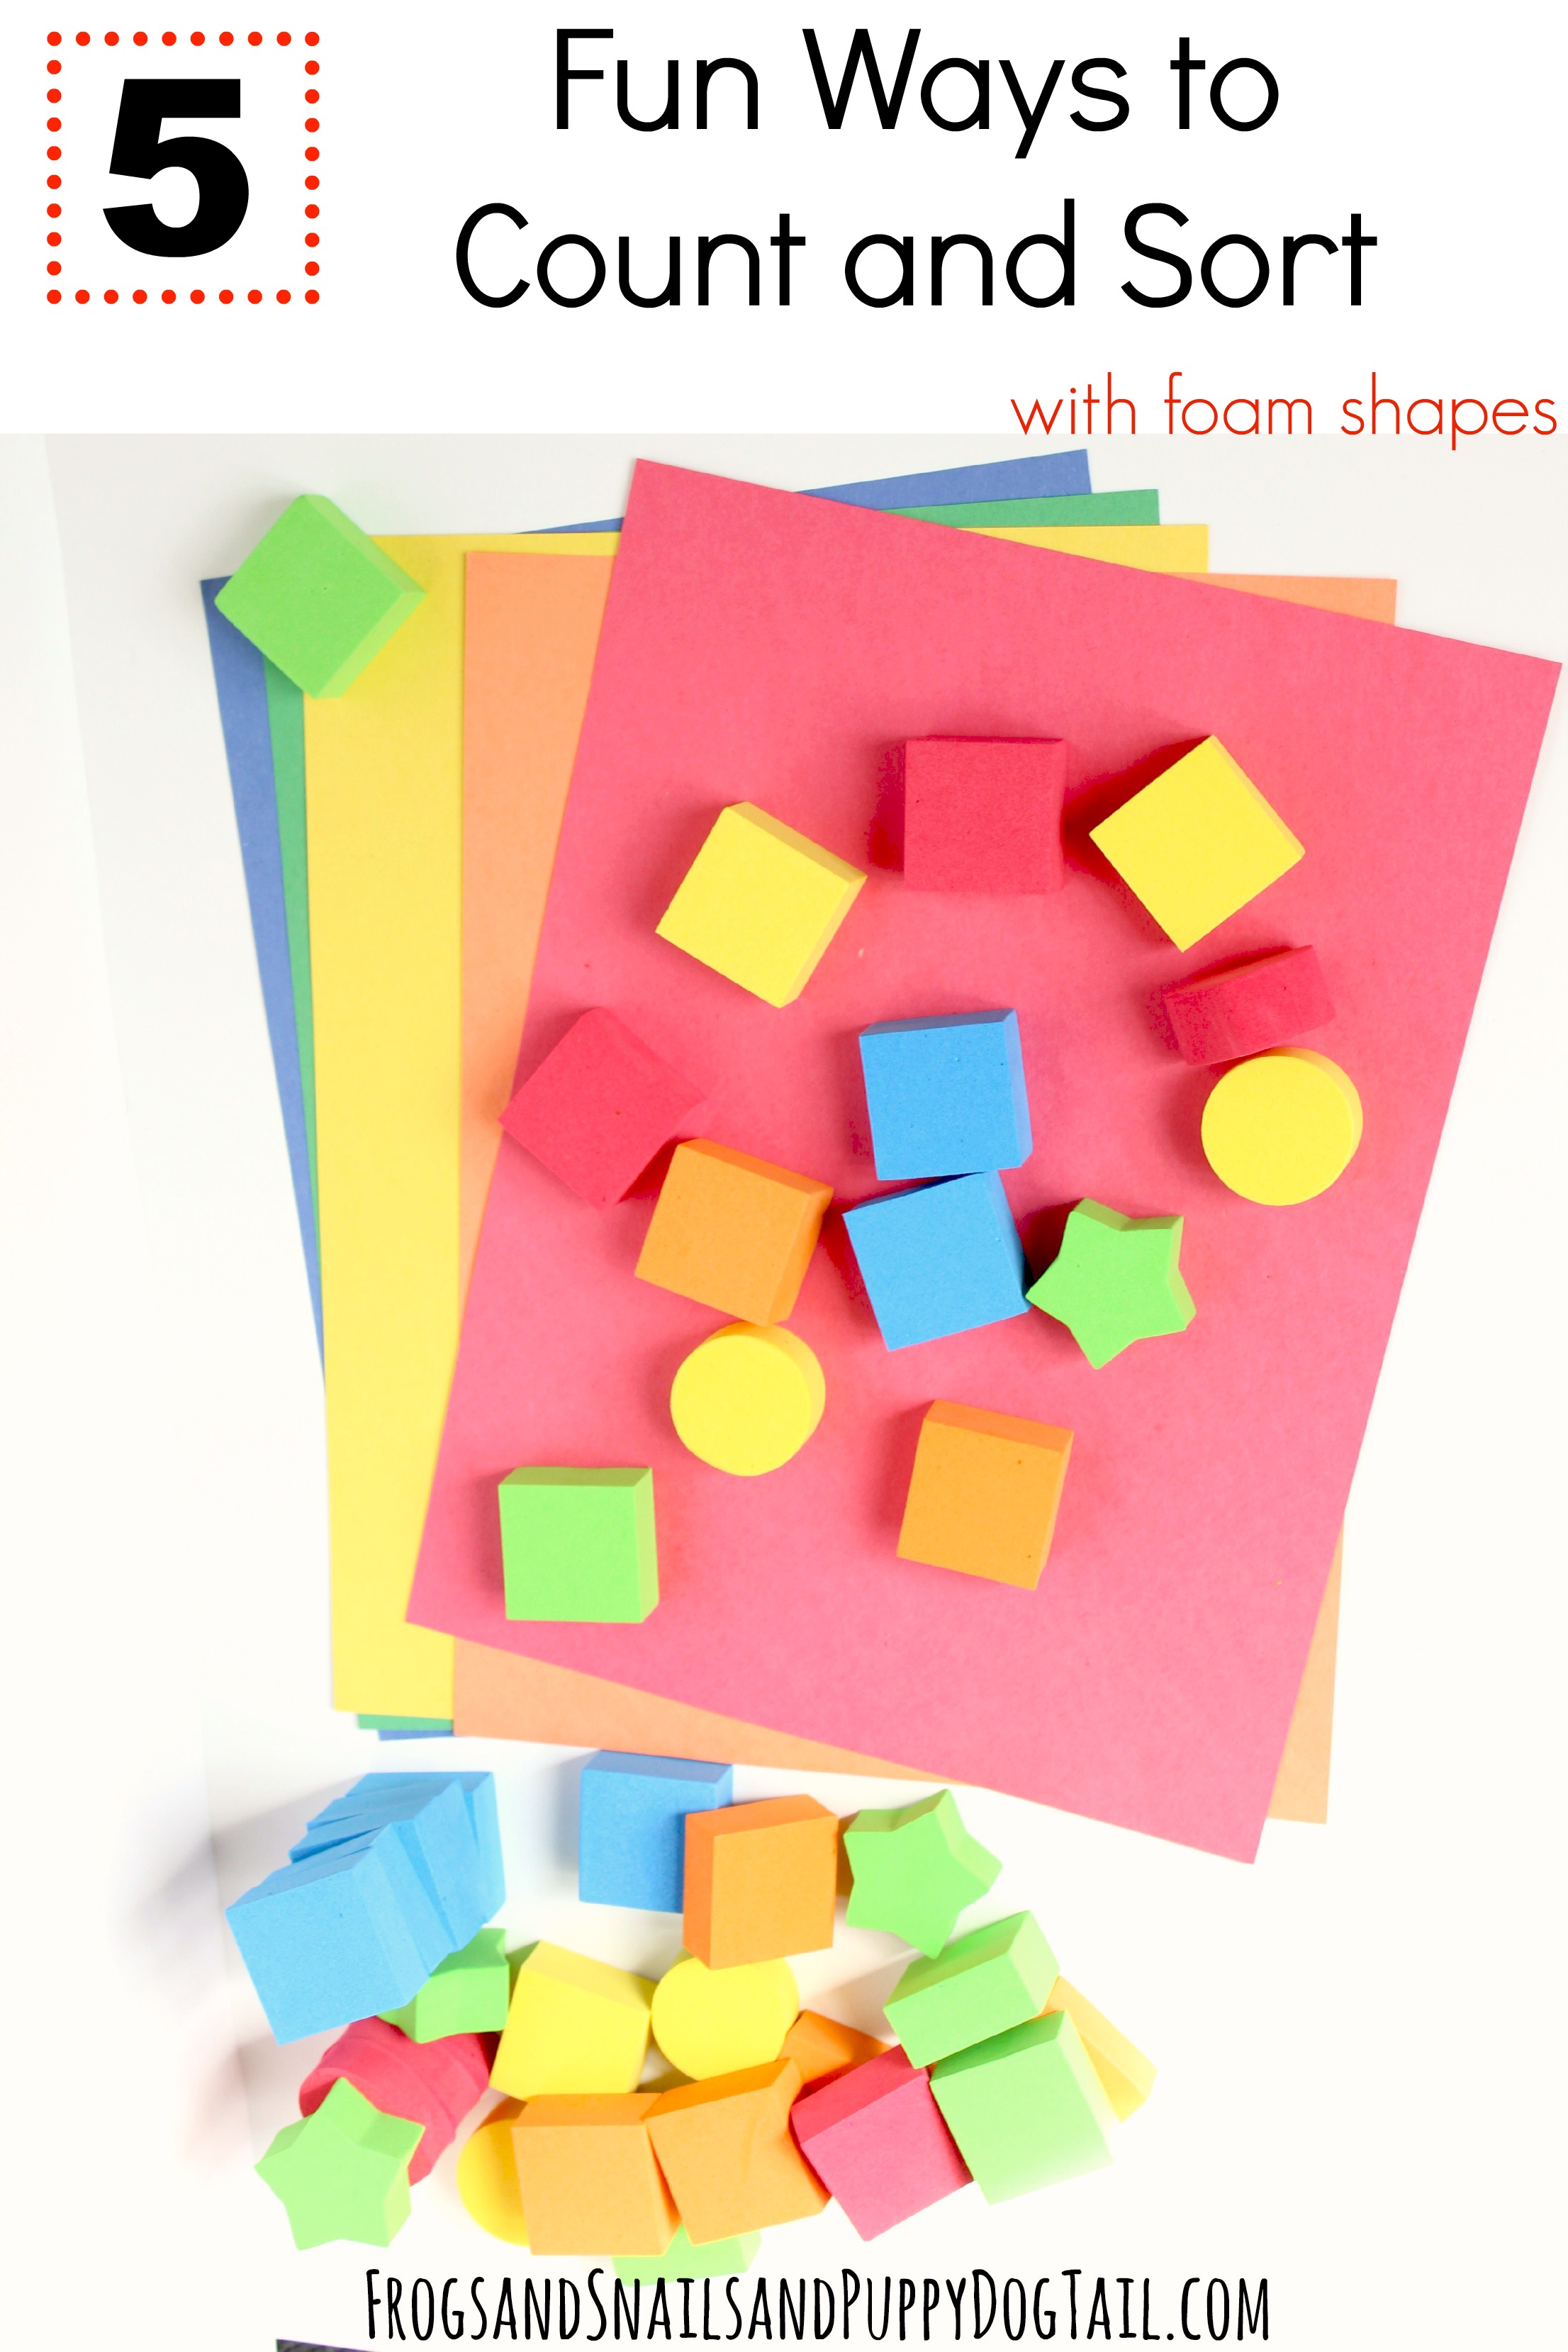 5 Fun Ways to Count and Sort with Foam Shapes - FSPDT